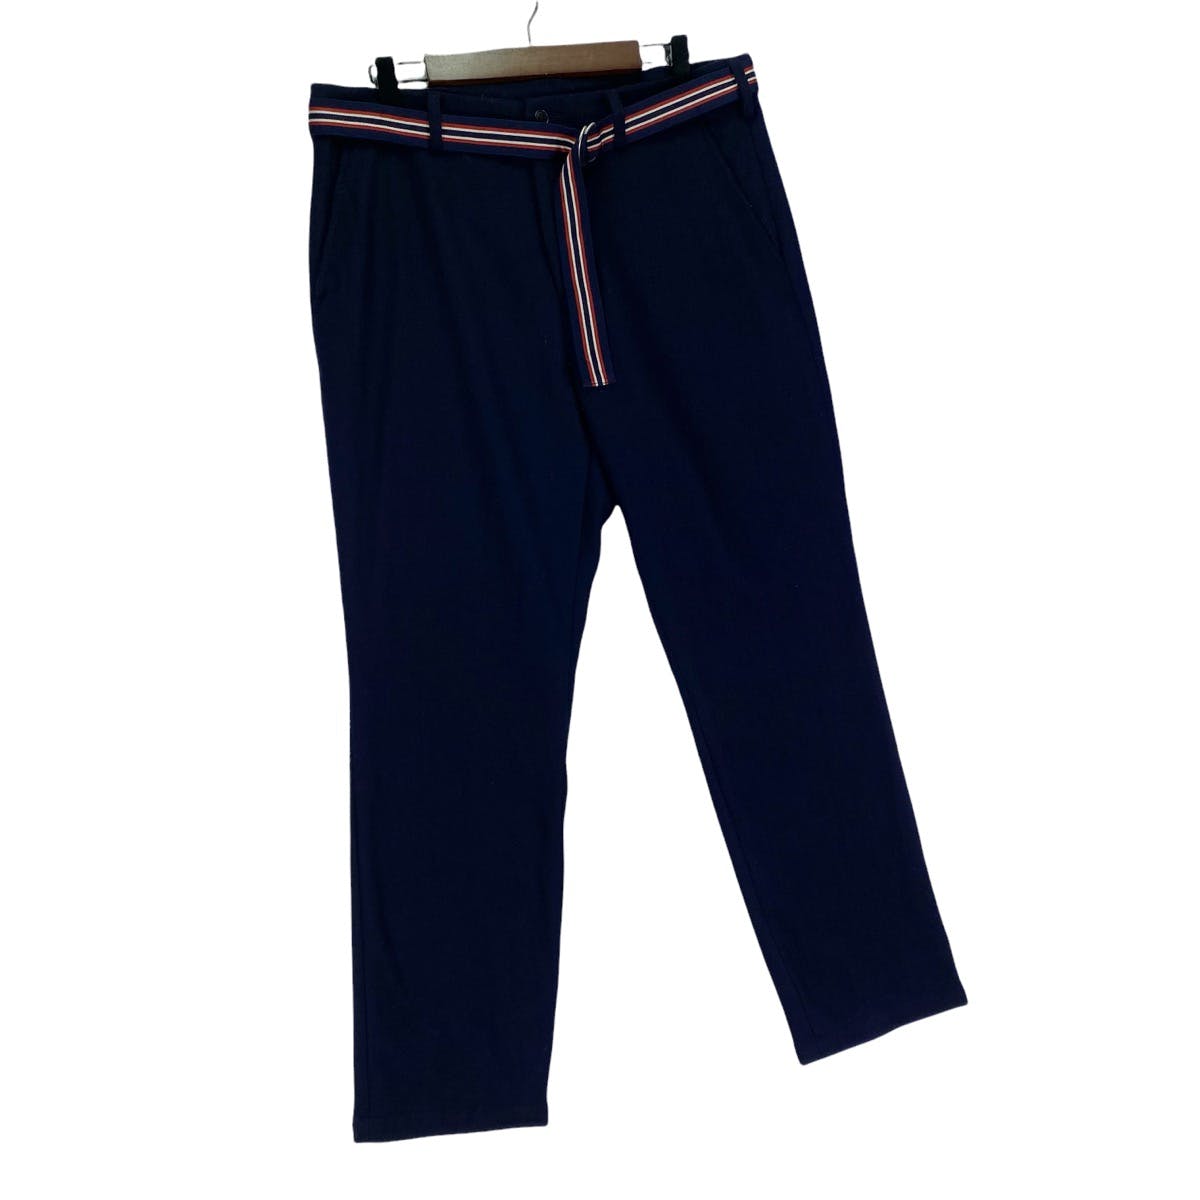 Fred Perry Navy Blue Trouser - 9